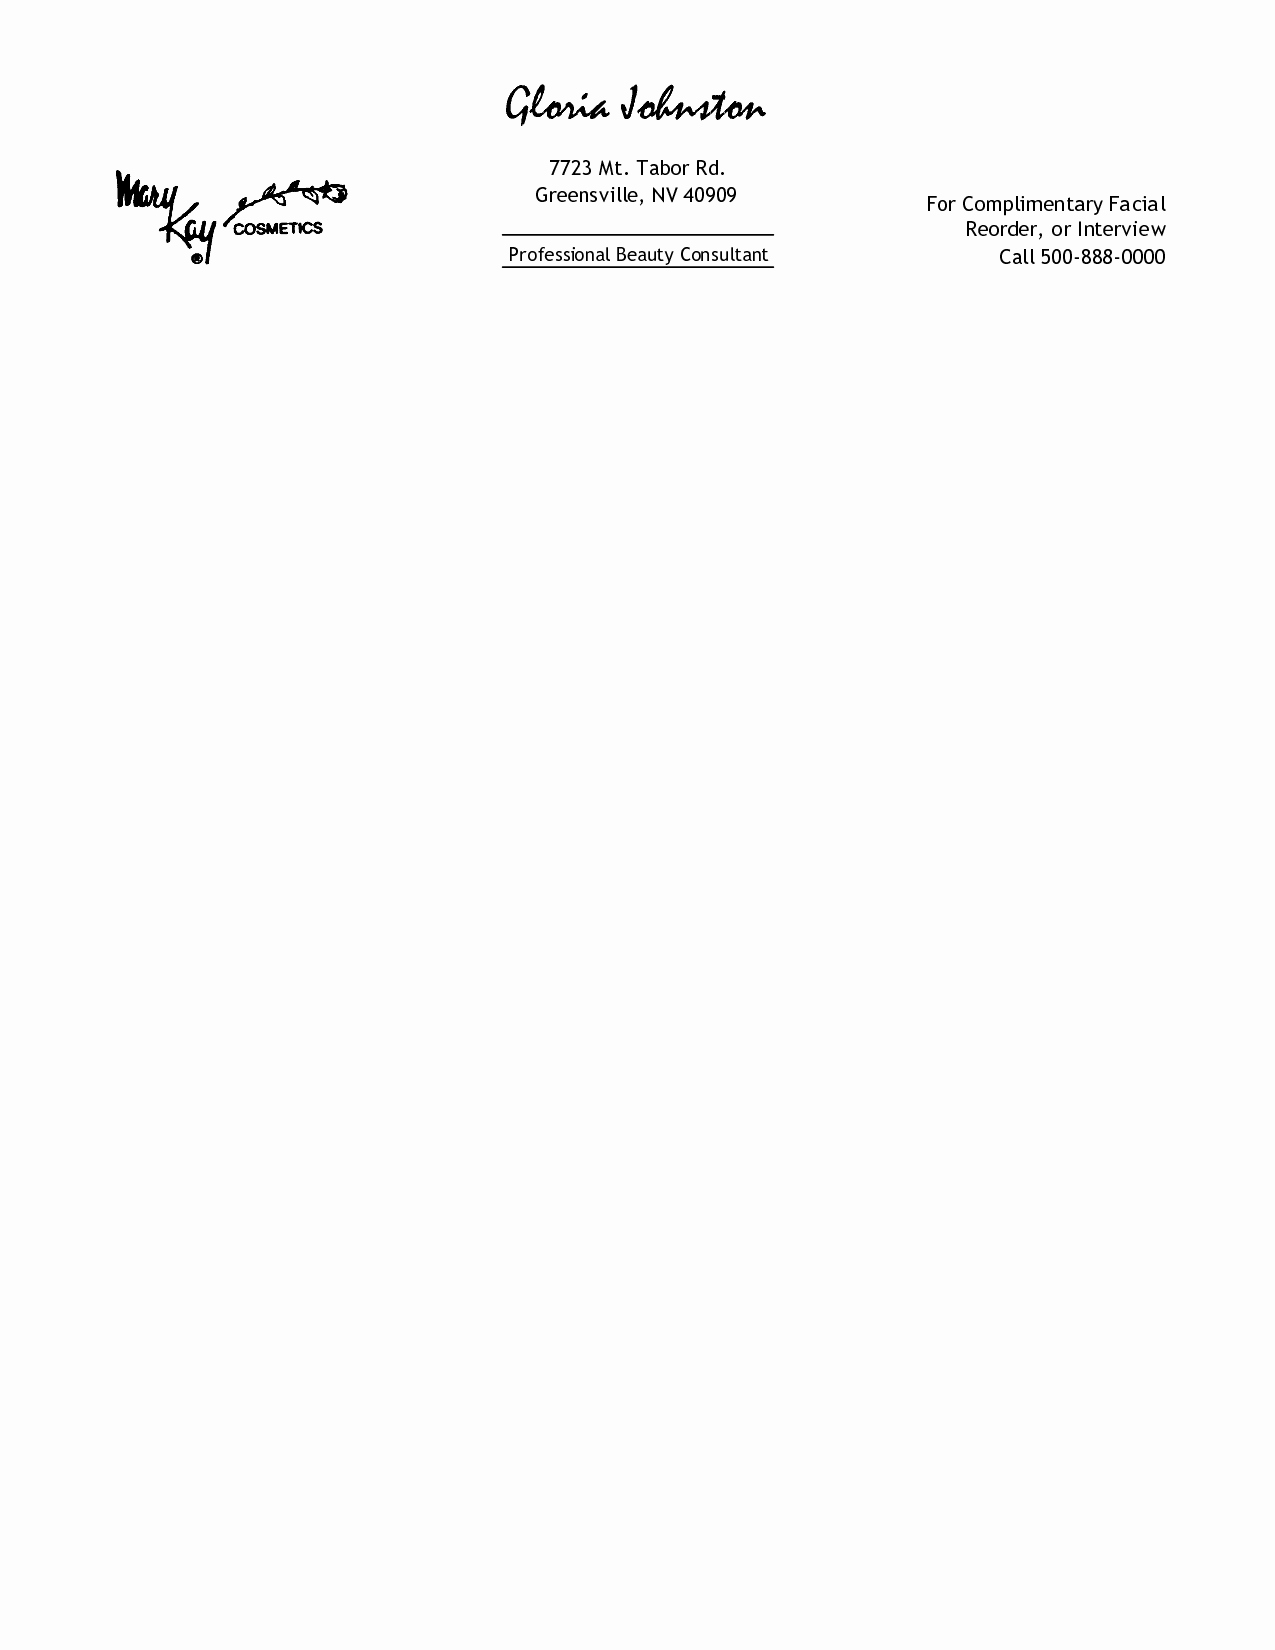 Personal Letterhead Templates Free Download Beautiful Free Personal Letterhead Templates Word